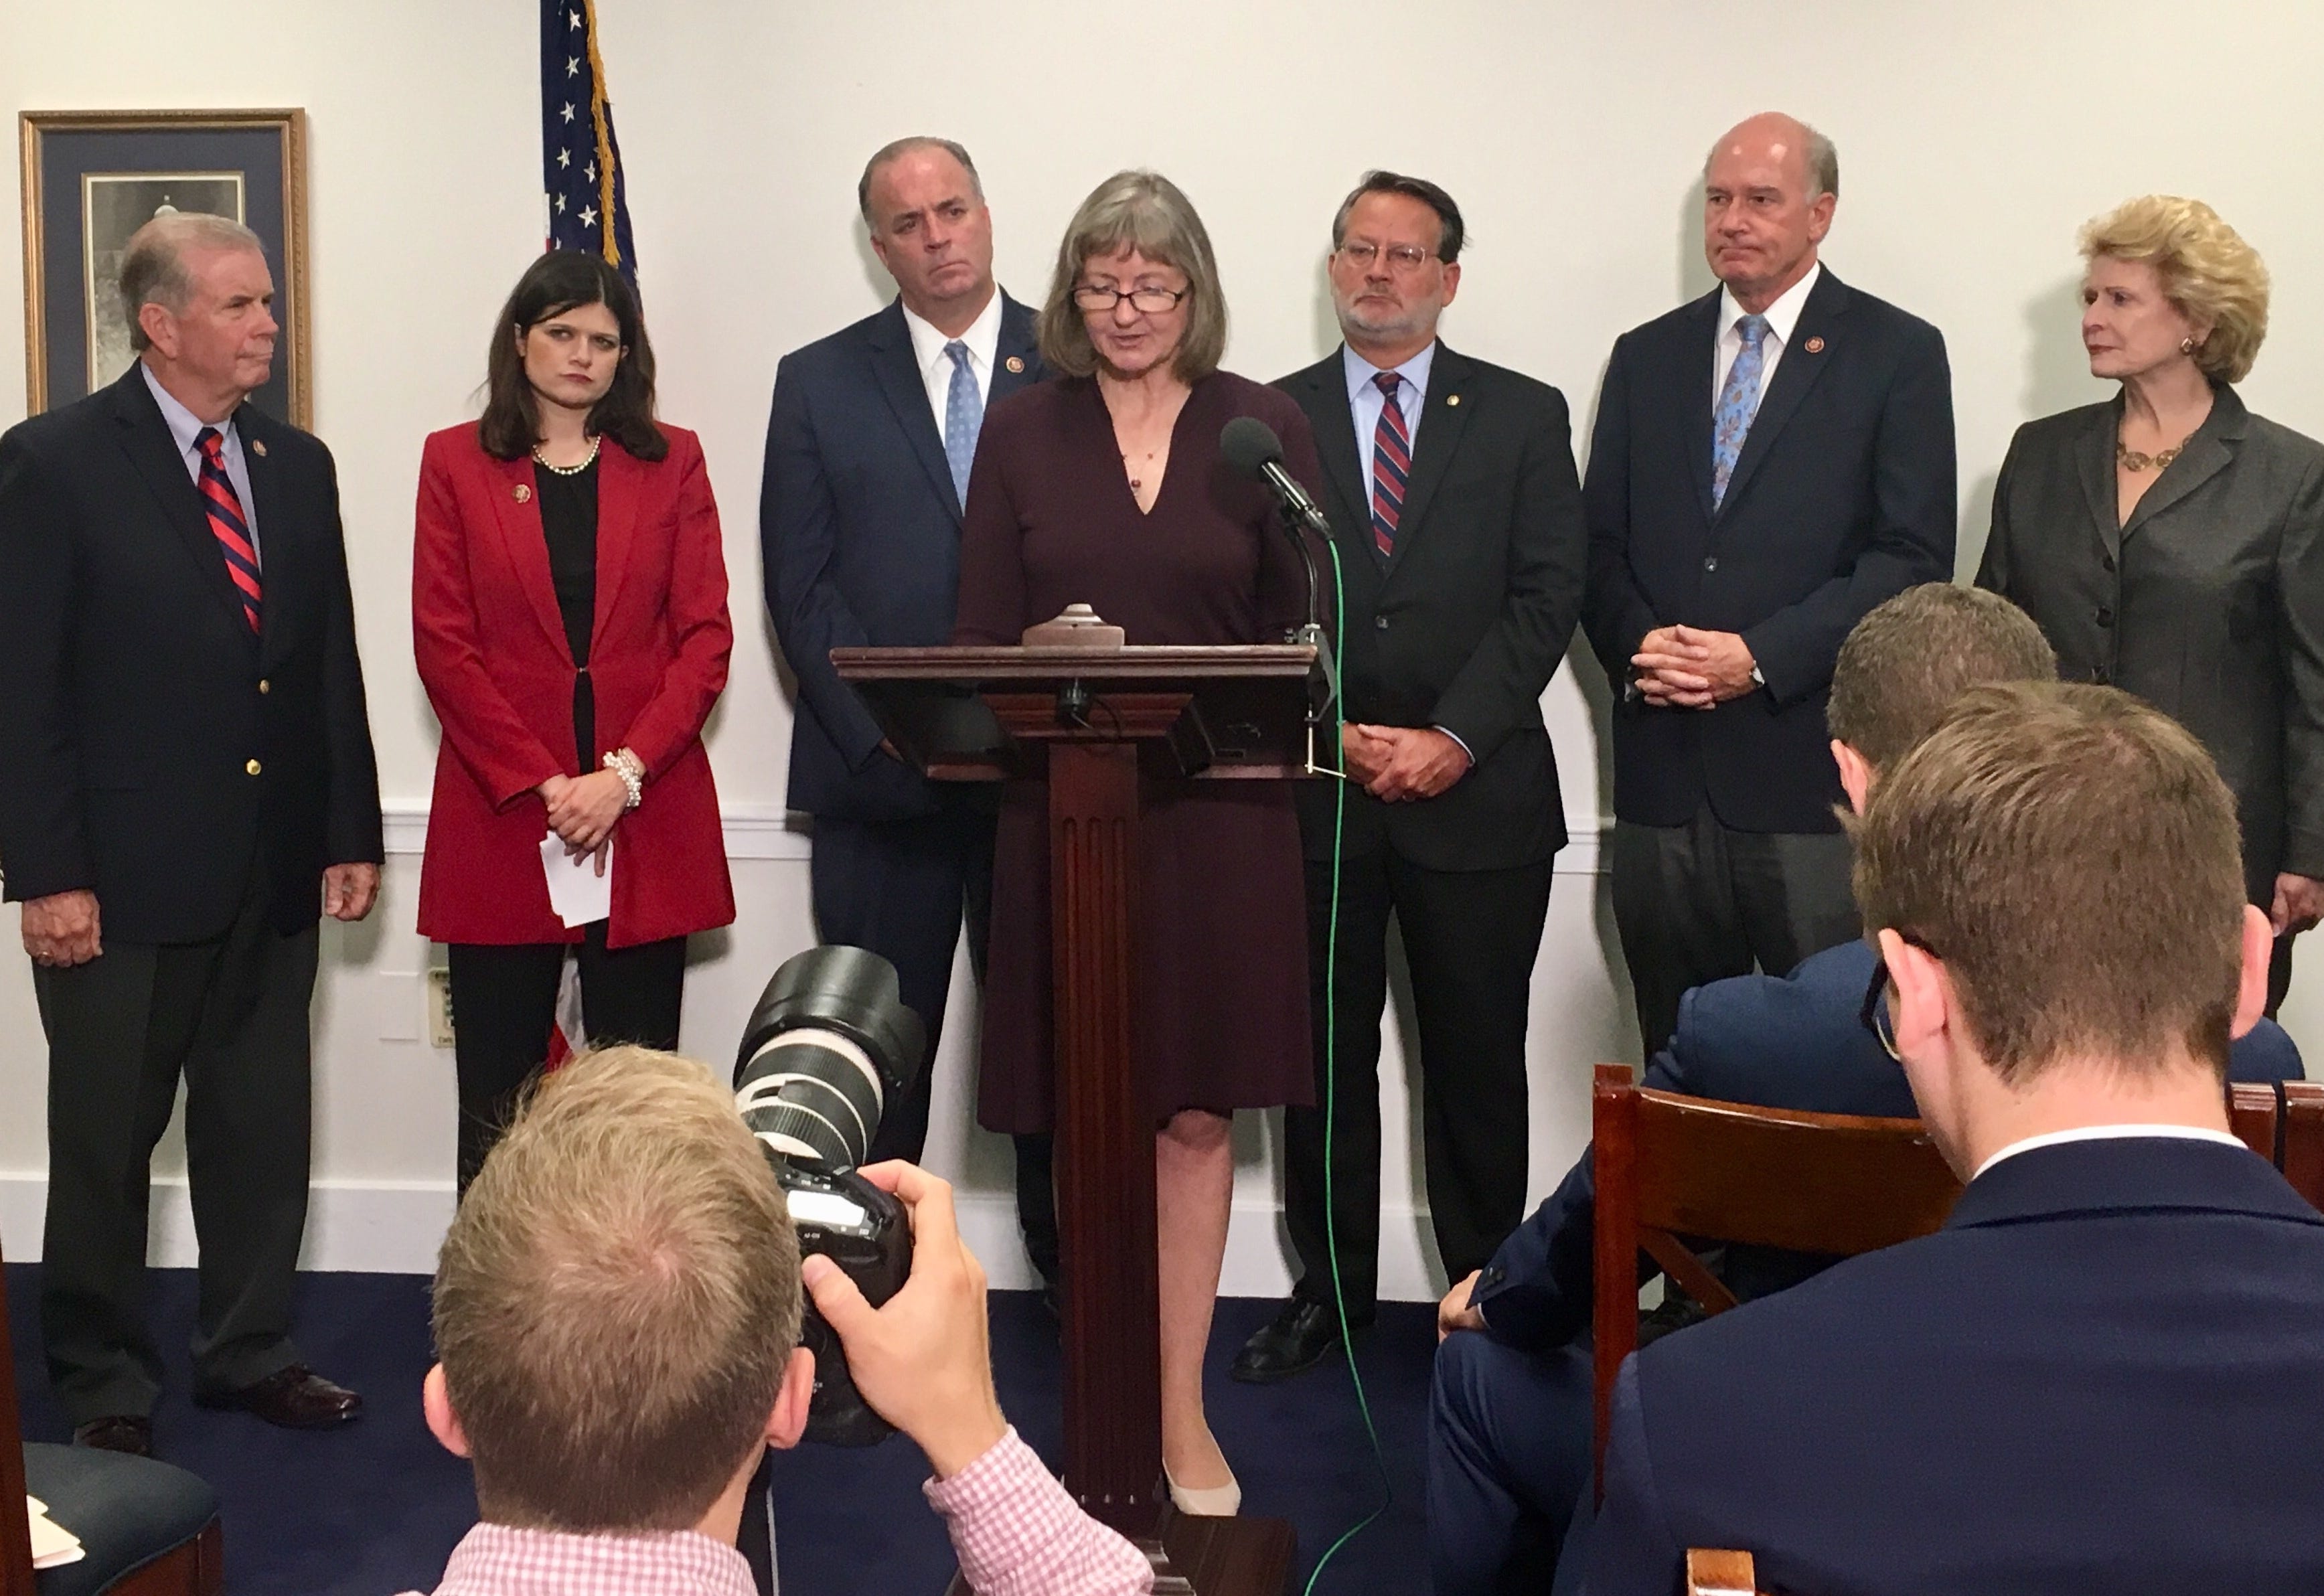 Elizabeth Whelan, the sister of Paul Whelan, the Michigan man imprisoned in Russia and accused, speaks at the U.S. Capitol on Sept. 12, 2019, about her brother's ongoing detainment. She is flanked by members of Congress who support her efforts to bring her brother home.